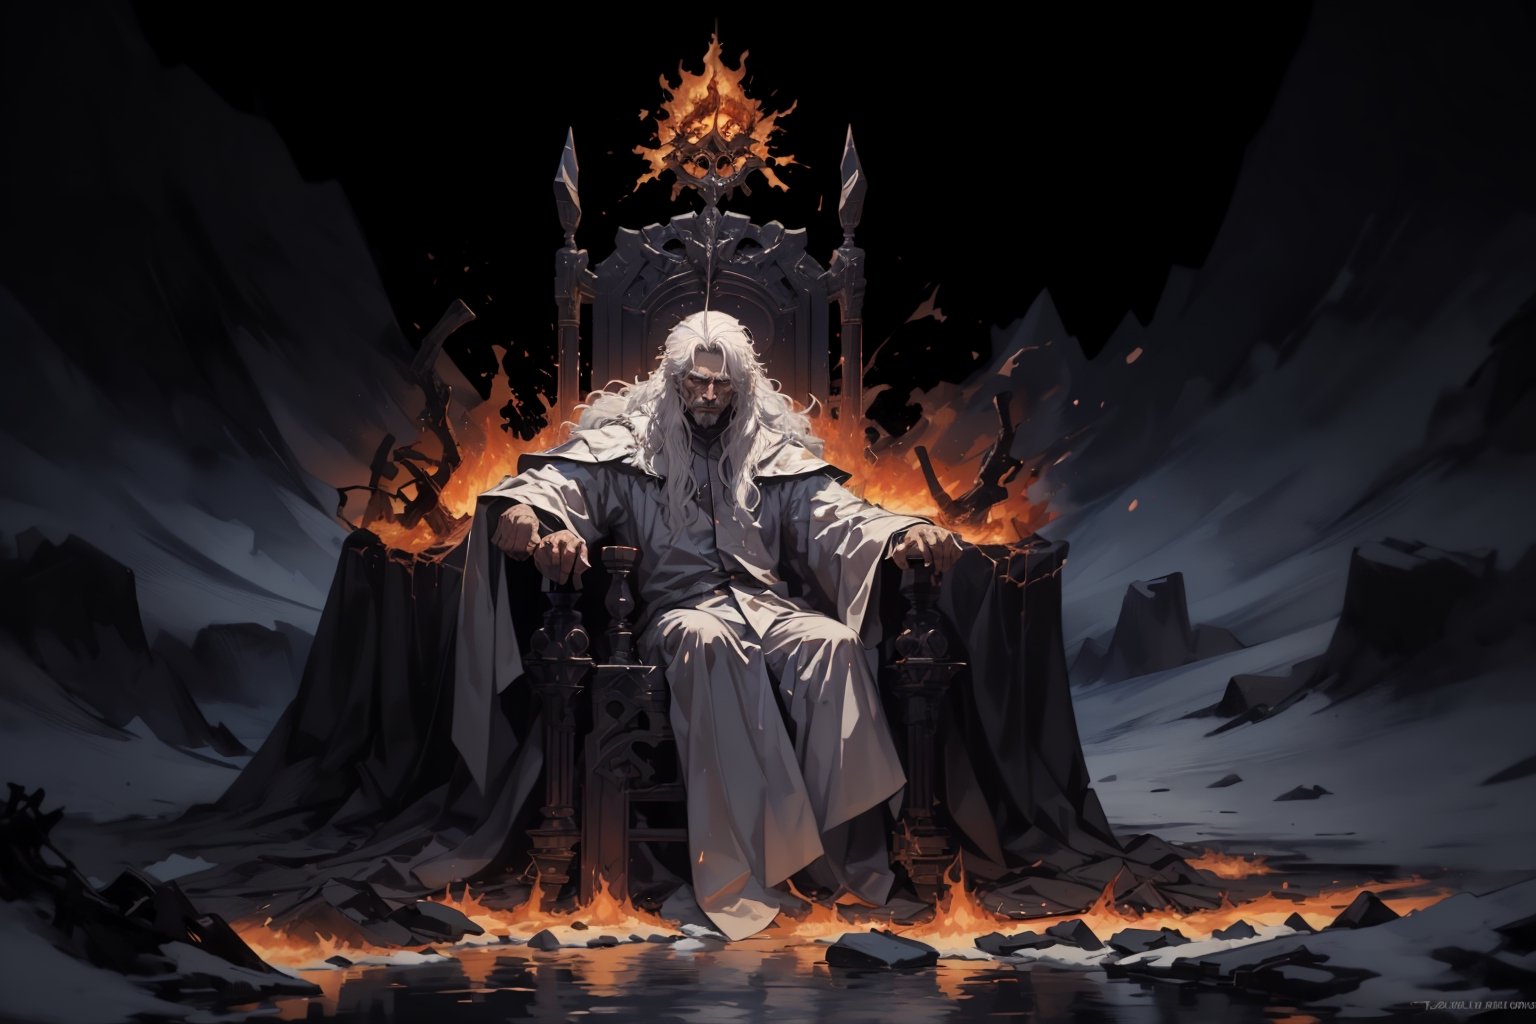 His robes were white as snow, his hair was white like wool. His throne was flaming with fire, its wheels blazing. A river of fire poured out of the throne, nodf_lora